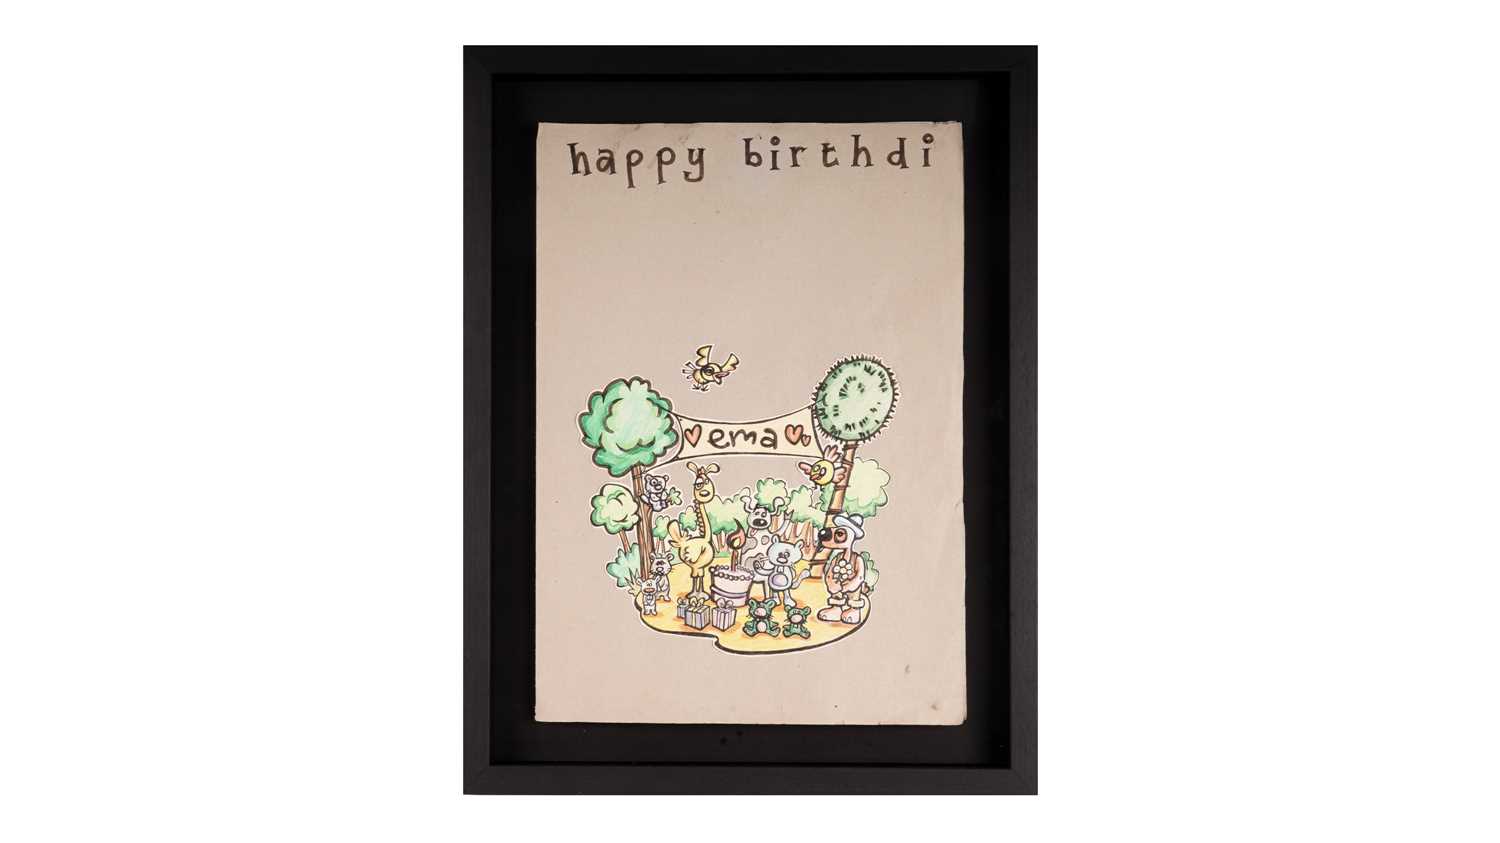 Lot 696 - BANKSY - happy birthdi ema | a personalised hand-painted birthday card